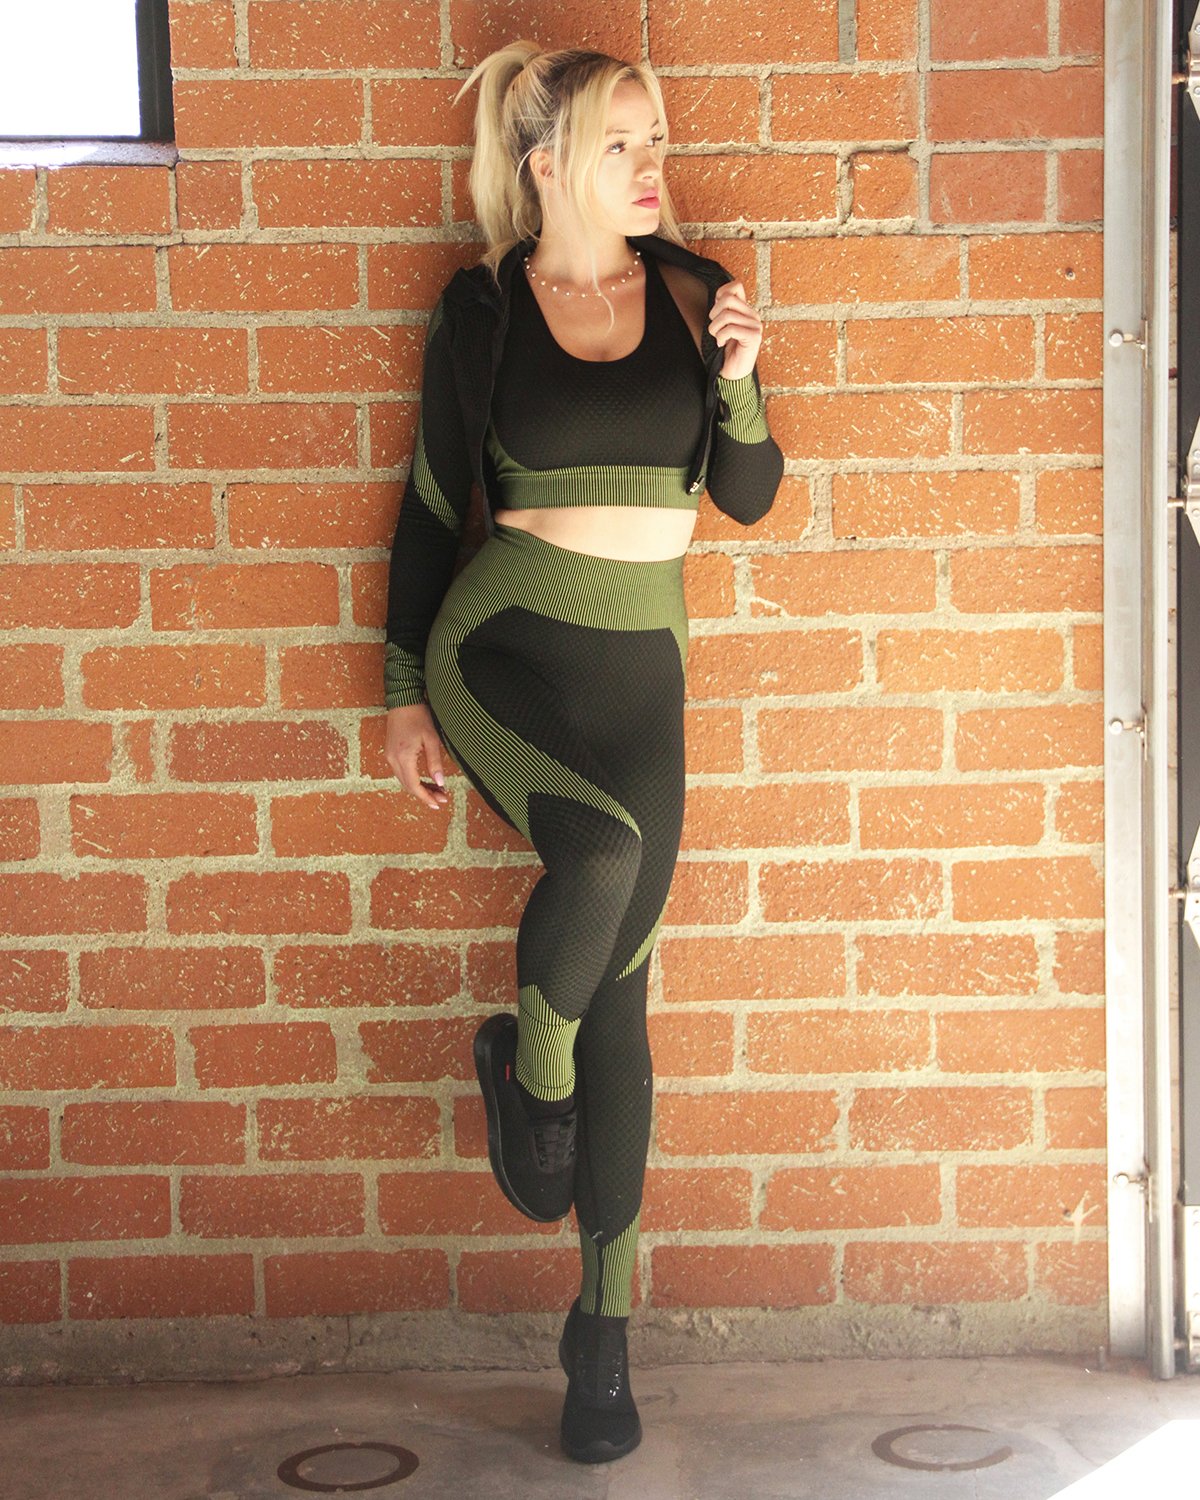 Seamless Jacket, Leggings & Sports Top 3 Set - Black With Green - Women's Activewear Set from fluentclothing.com